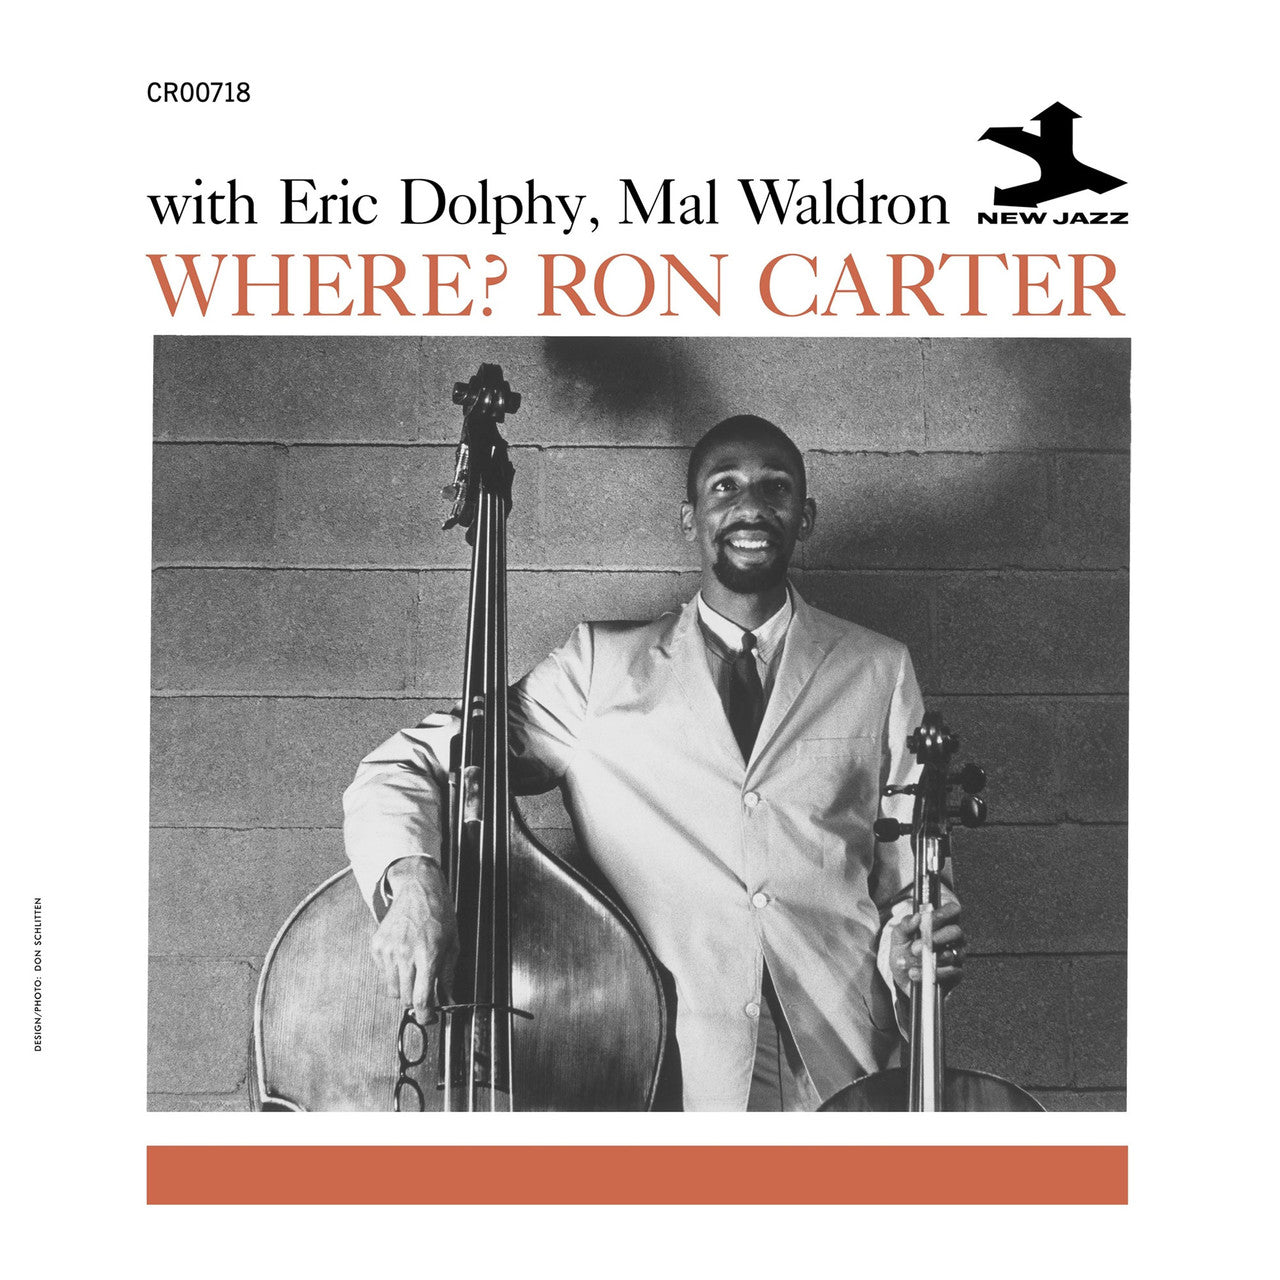 Ron Carter with Eric Dolphy, Mal Waldron - Where? - OJC LP